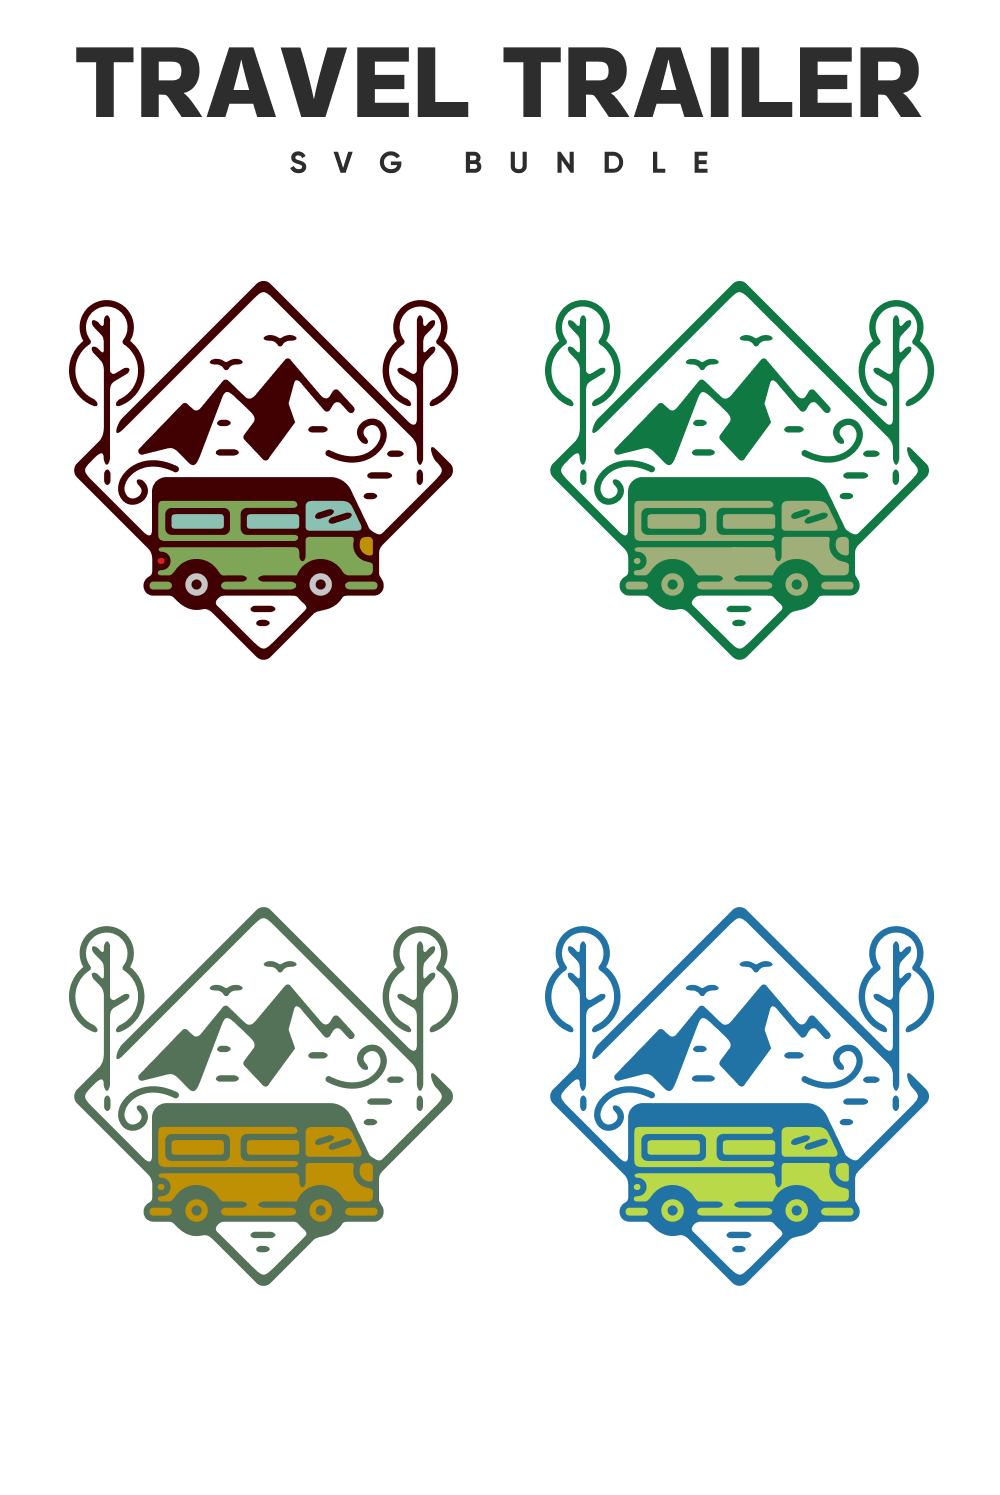 Travel trailer in different colors.